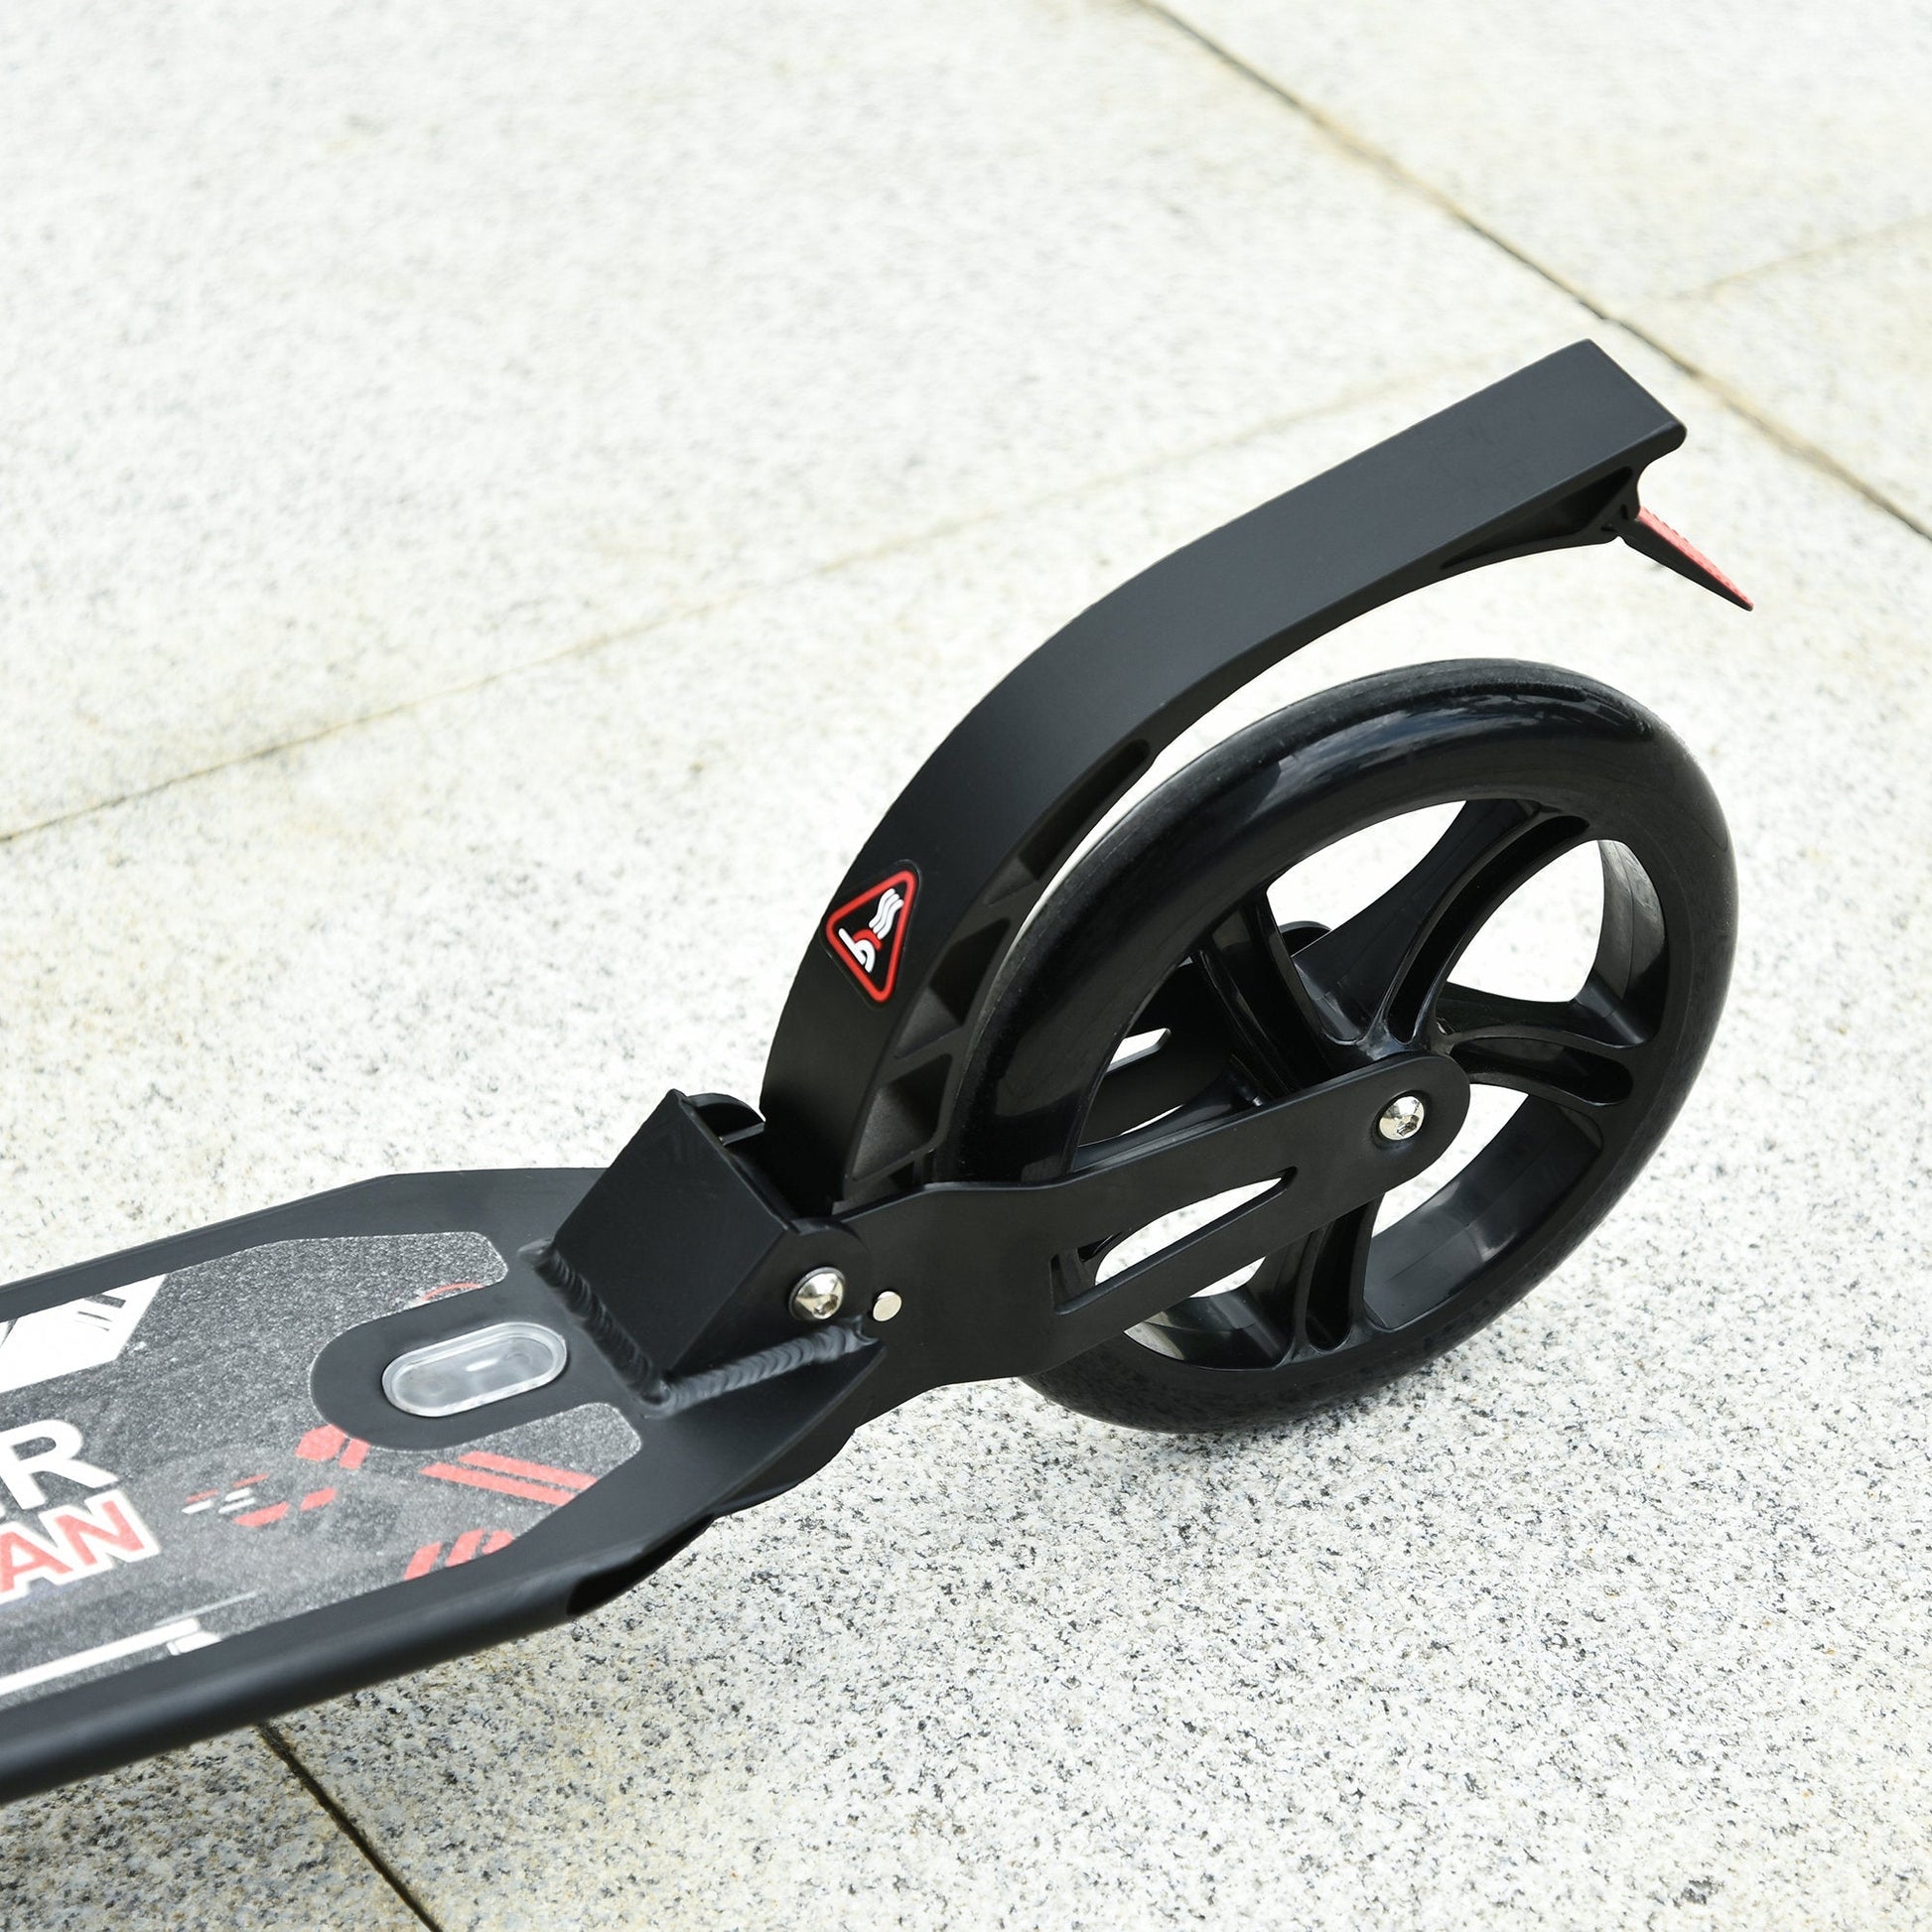 Foldable Kick Scooter Height Adjustable Ride On Bike with Real Wheel Brake, Dual Shock-Absorbing, Kickstand, and 7.75'' Big Wheels For 14+ Teens Adult, Black - Gallery Canada